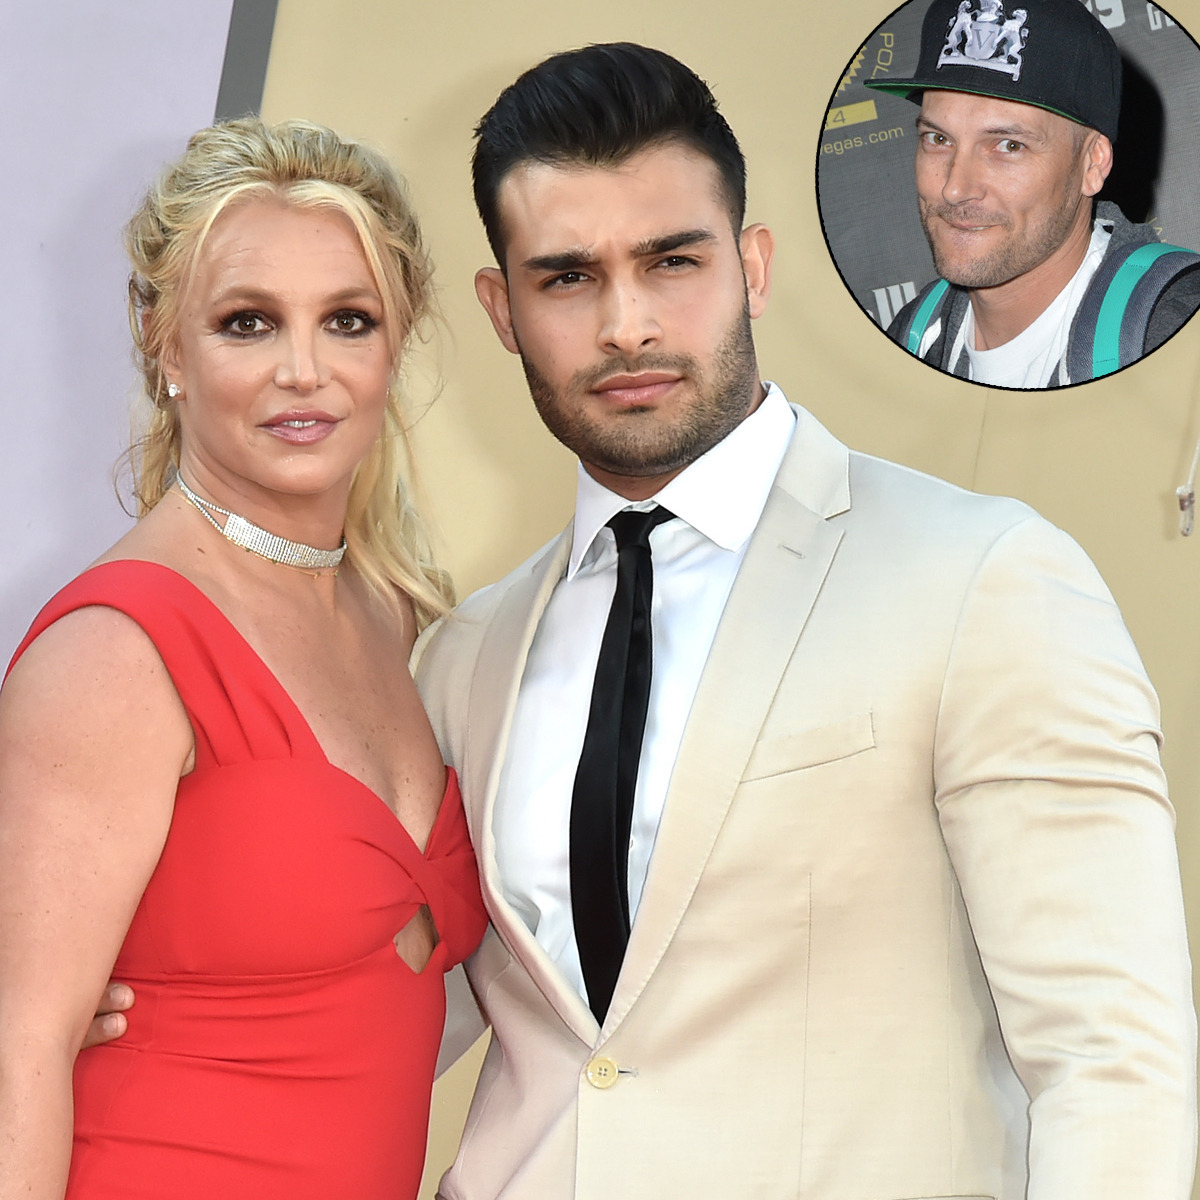 Britney Spears' two sons will not be at her wedding to Sam Asghari